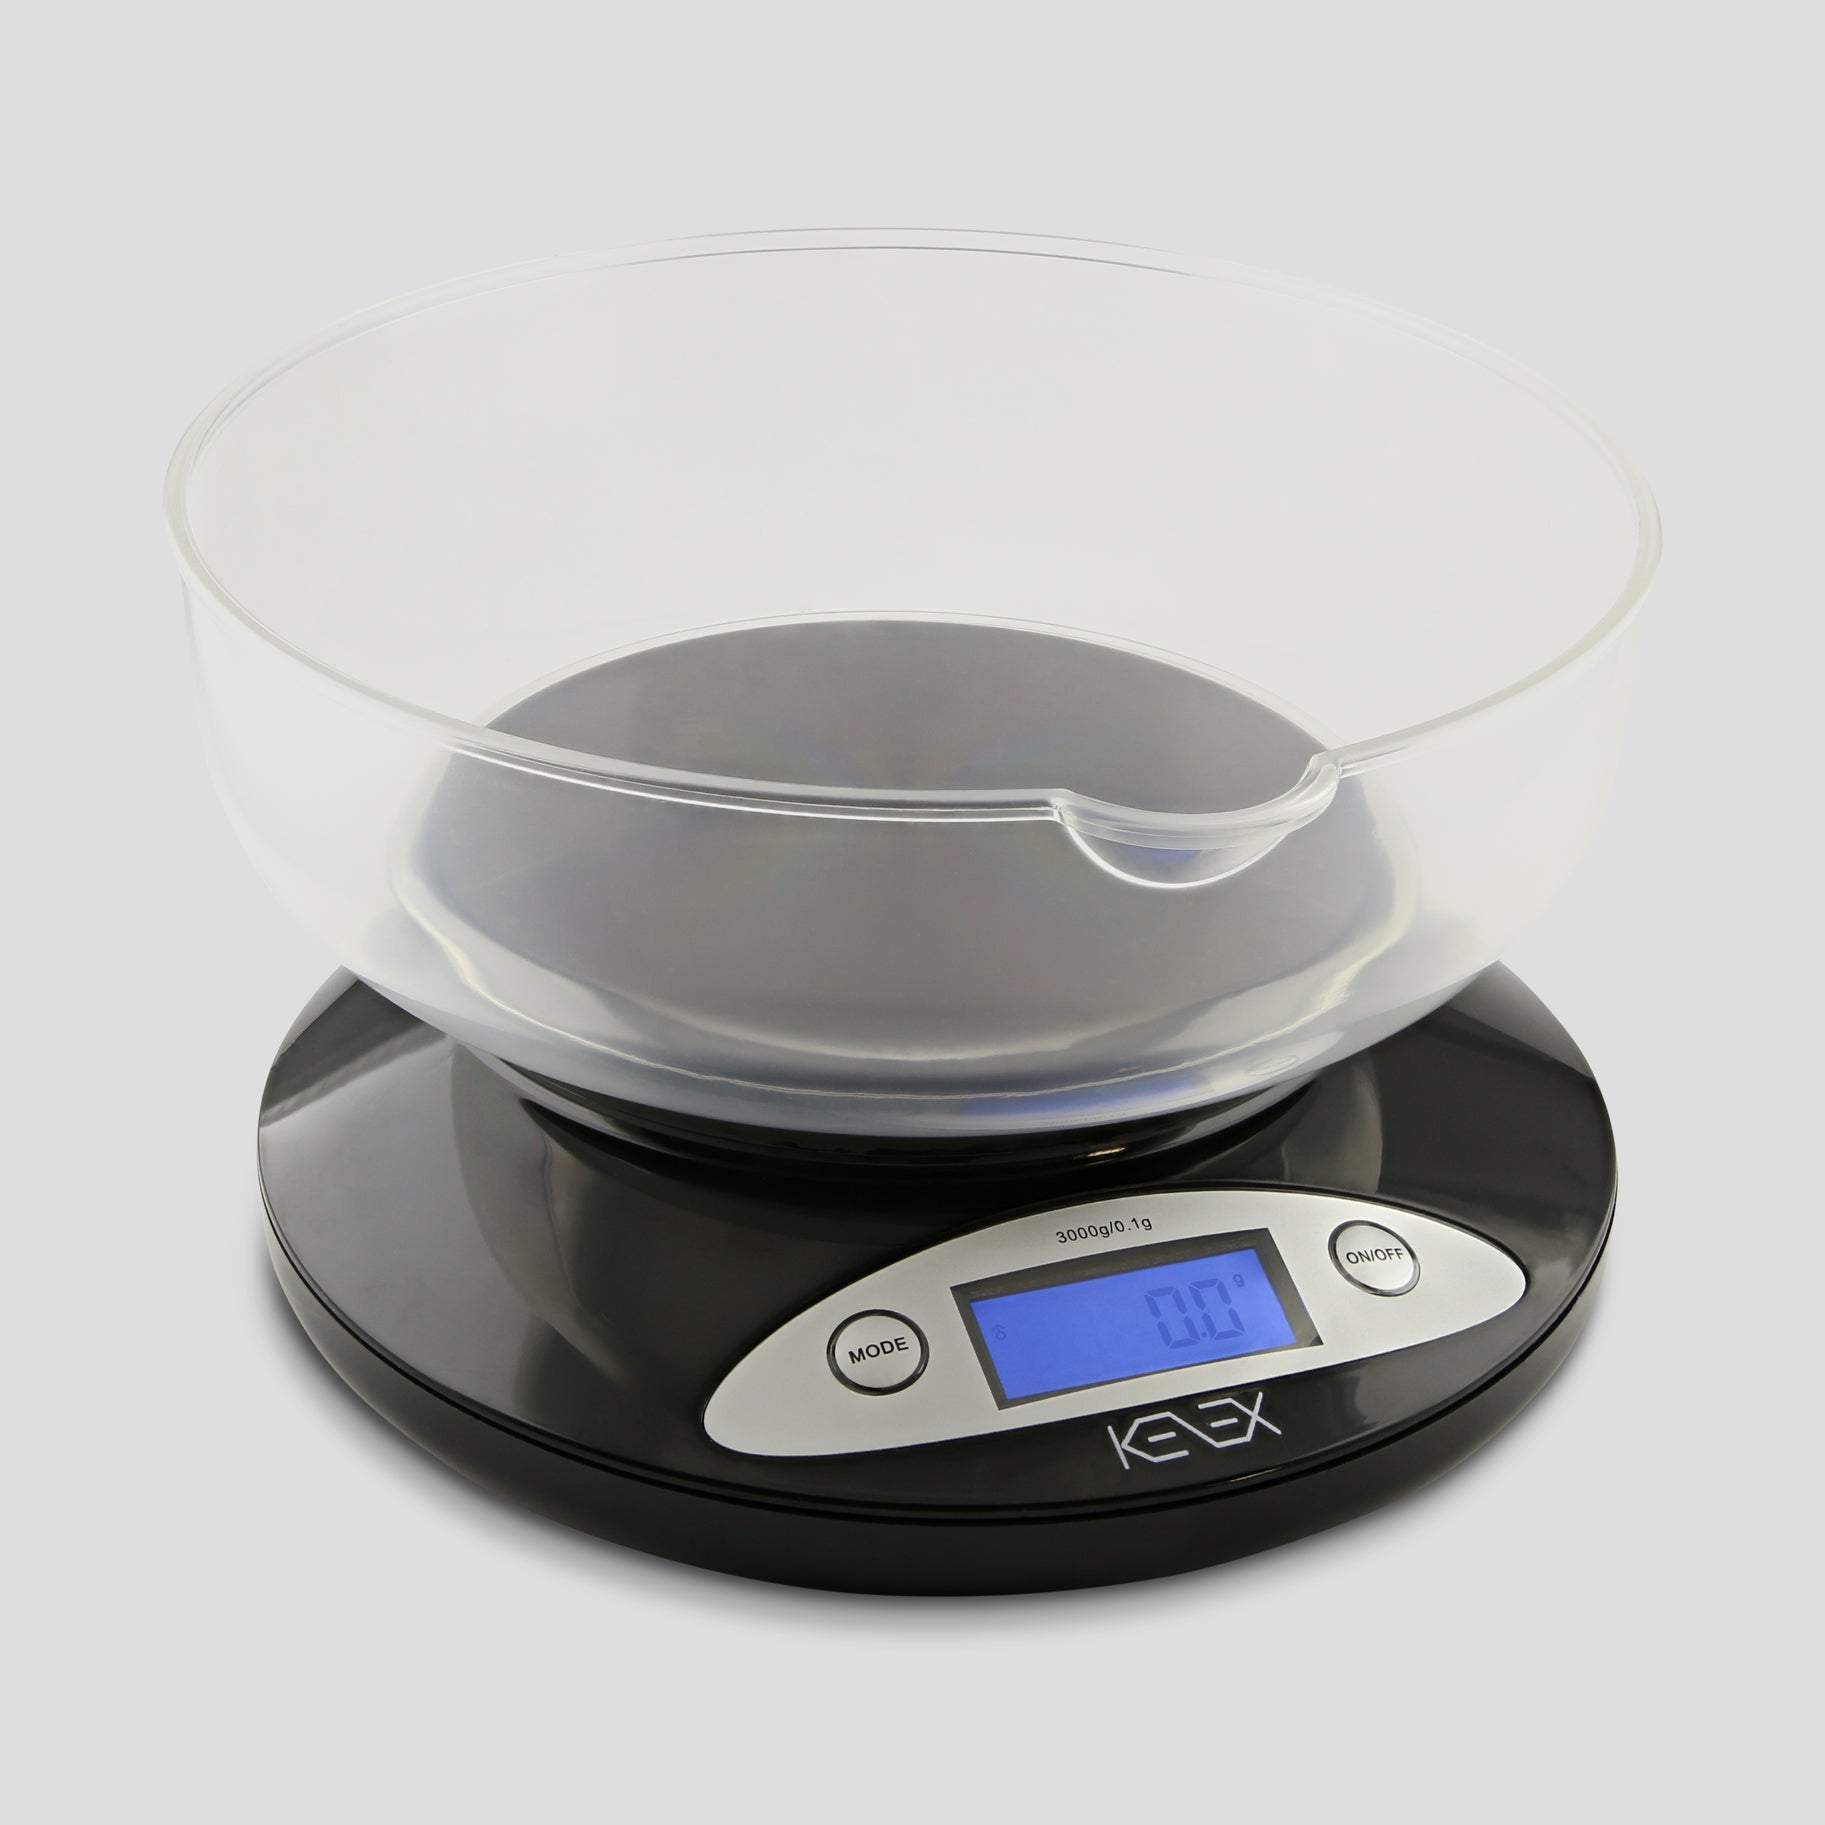 Kenex Table Top & Counter Scale (3000 G Capacity x 0.1 G Accuracy)